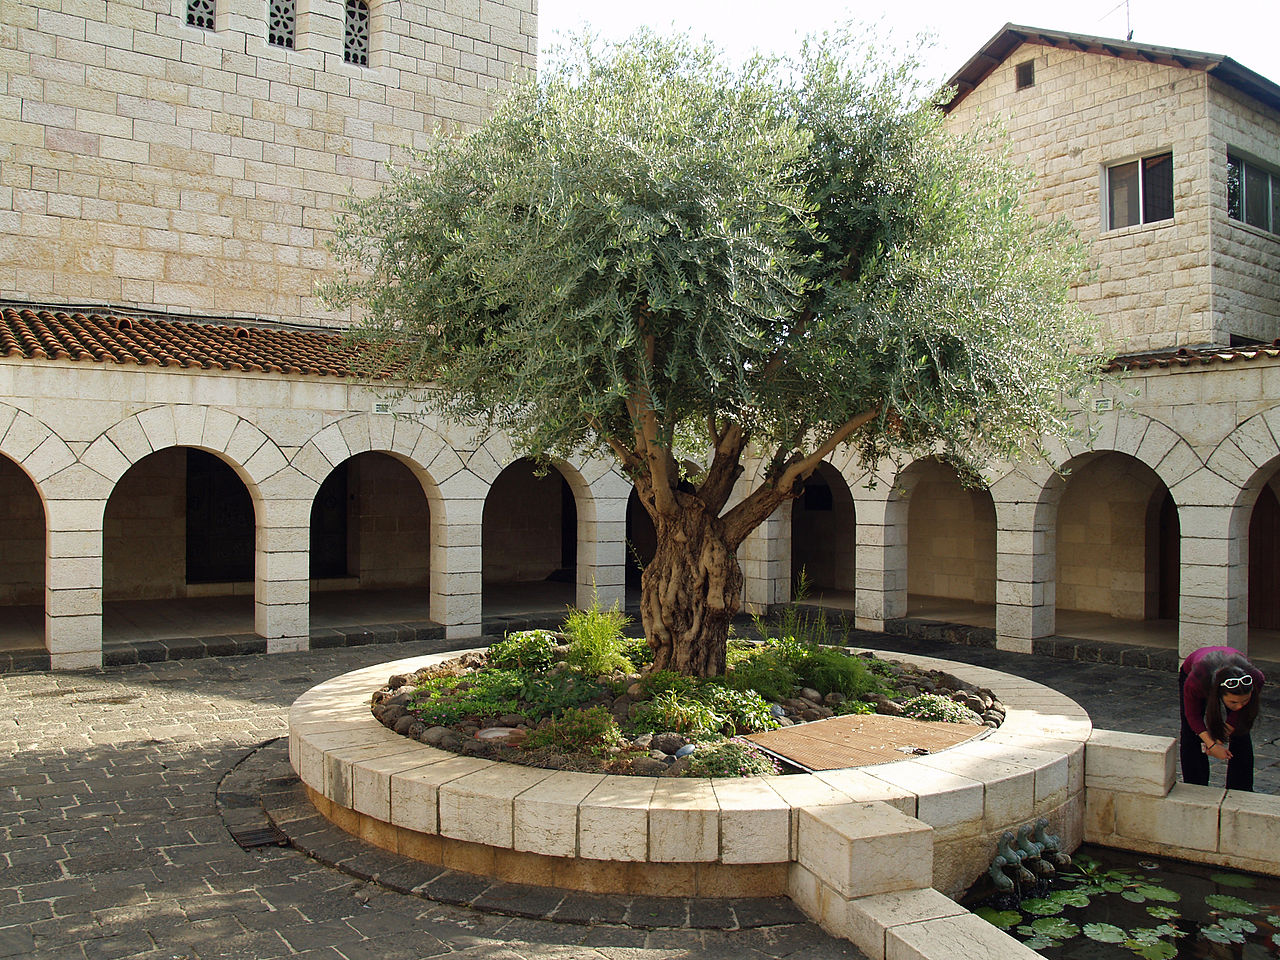 Courtyard of the Church of the Multiplication in Tabgha